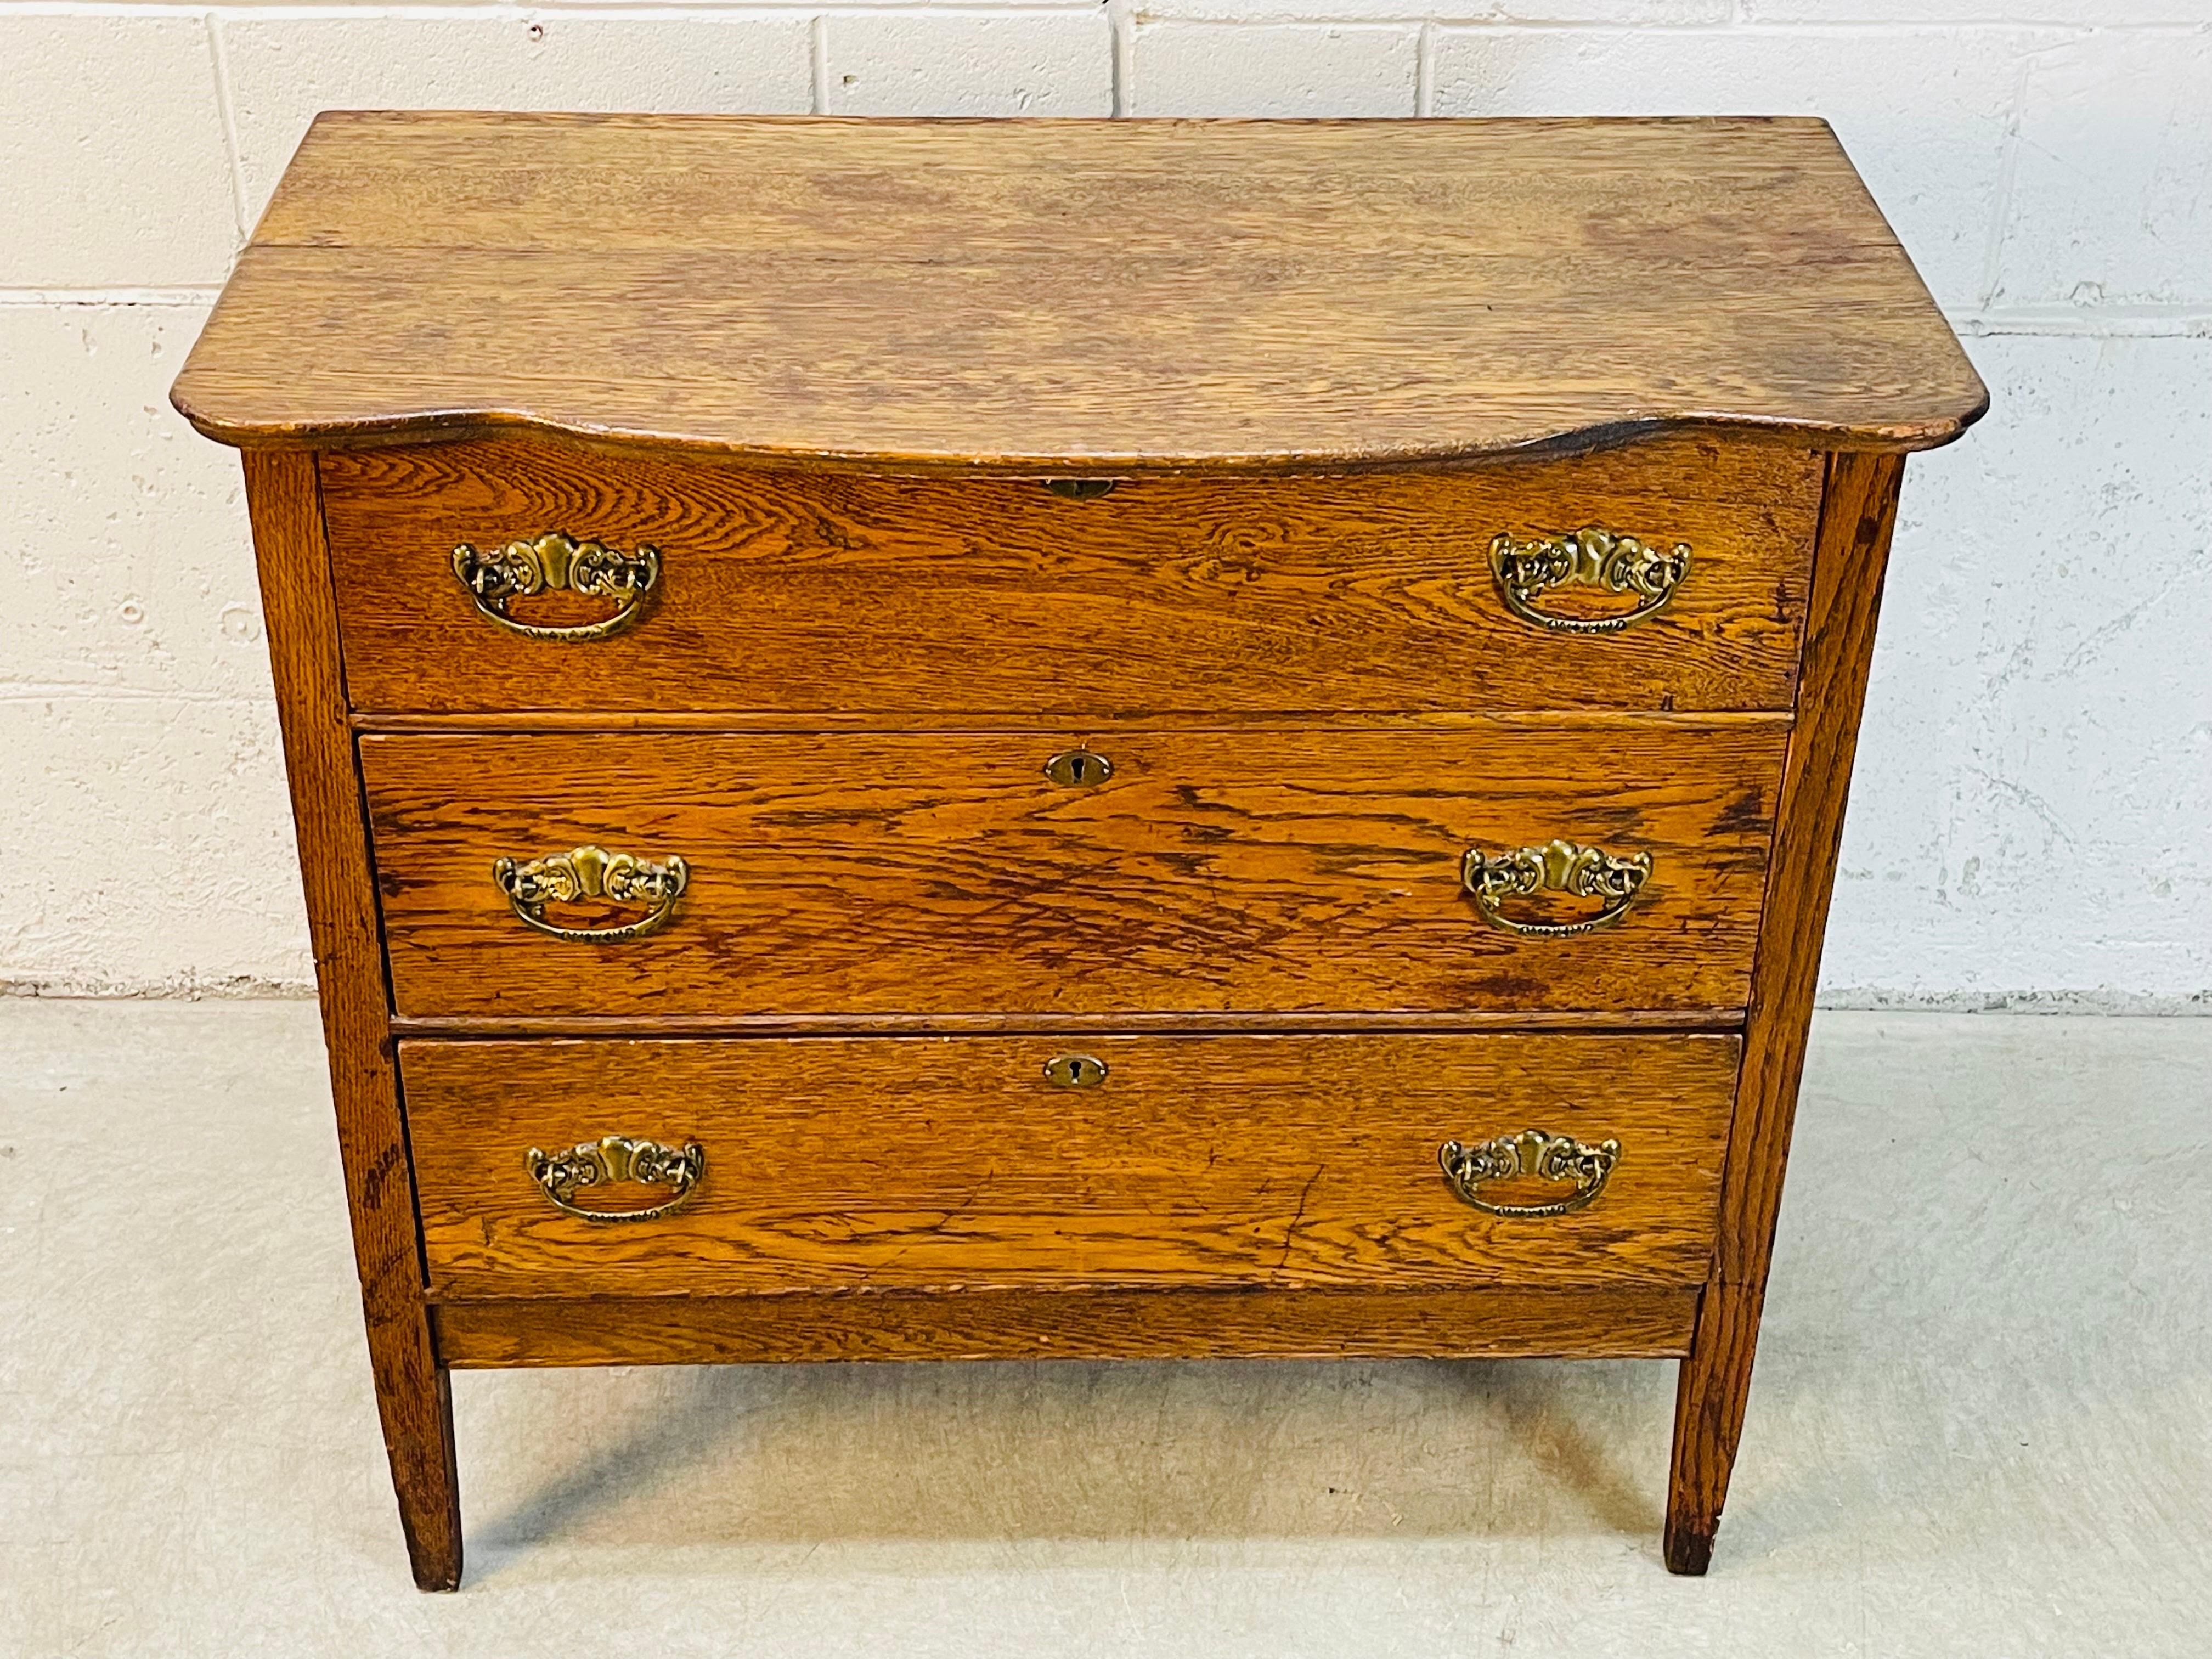 Vintage oak wood three drawer dresser or storage cabinet. The drawer pulls are brass and the drawers open and close freely. Was refinished a long time ago and has a nice aged patina. Drawers are 5-6”H. Cabinet is sturdy. No marks.